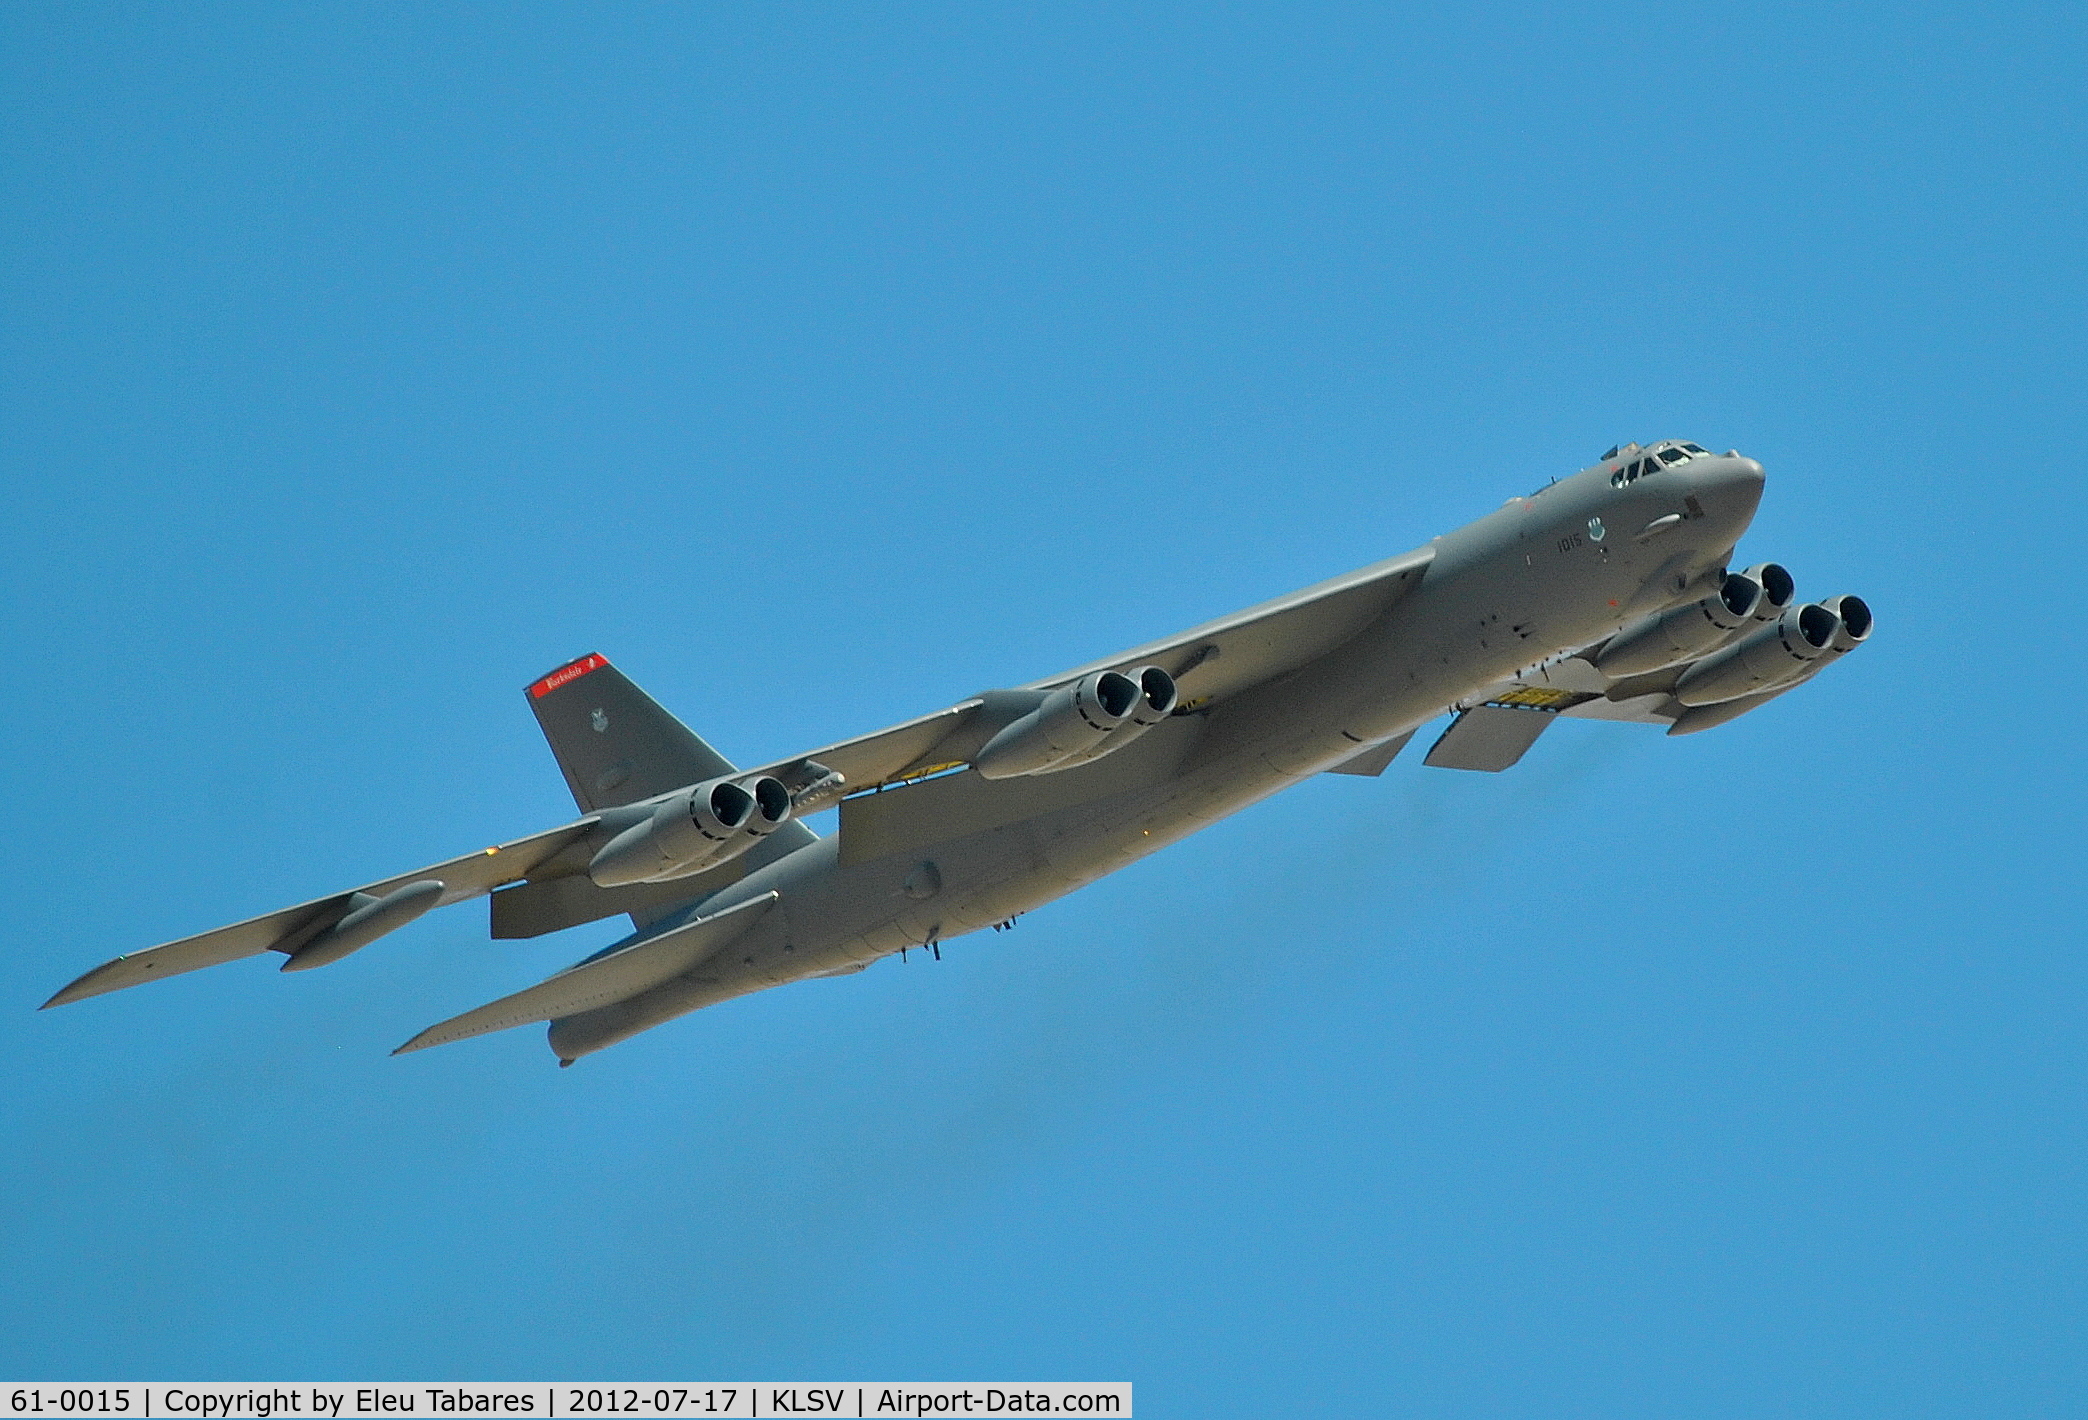 61-0015, 1961 Boeing B-52H Stratofortress C/N 464442, Taken during Red Flag Exercise at Nellis Air Force Base, Nevada.